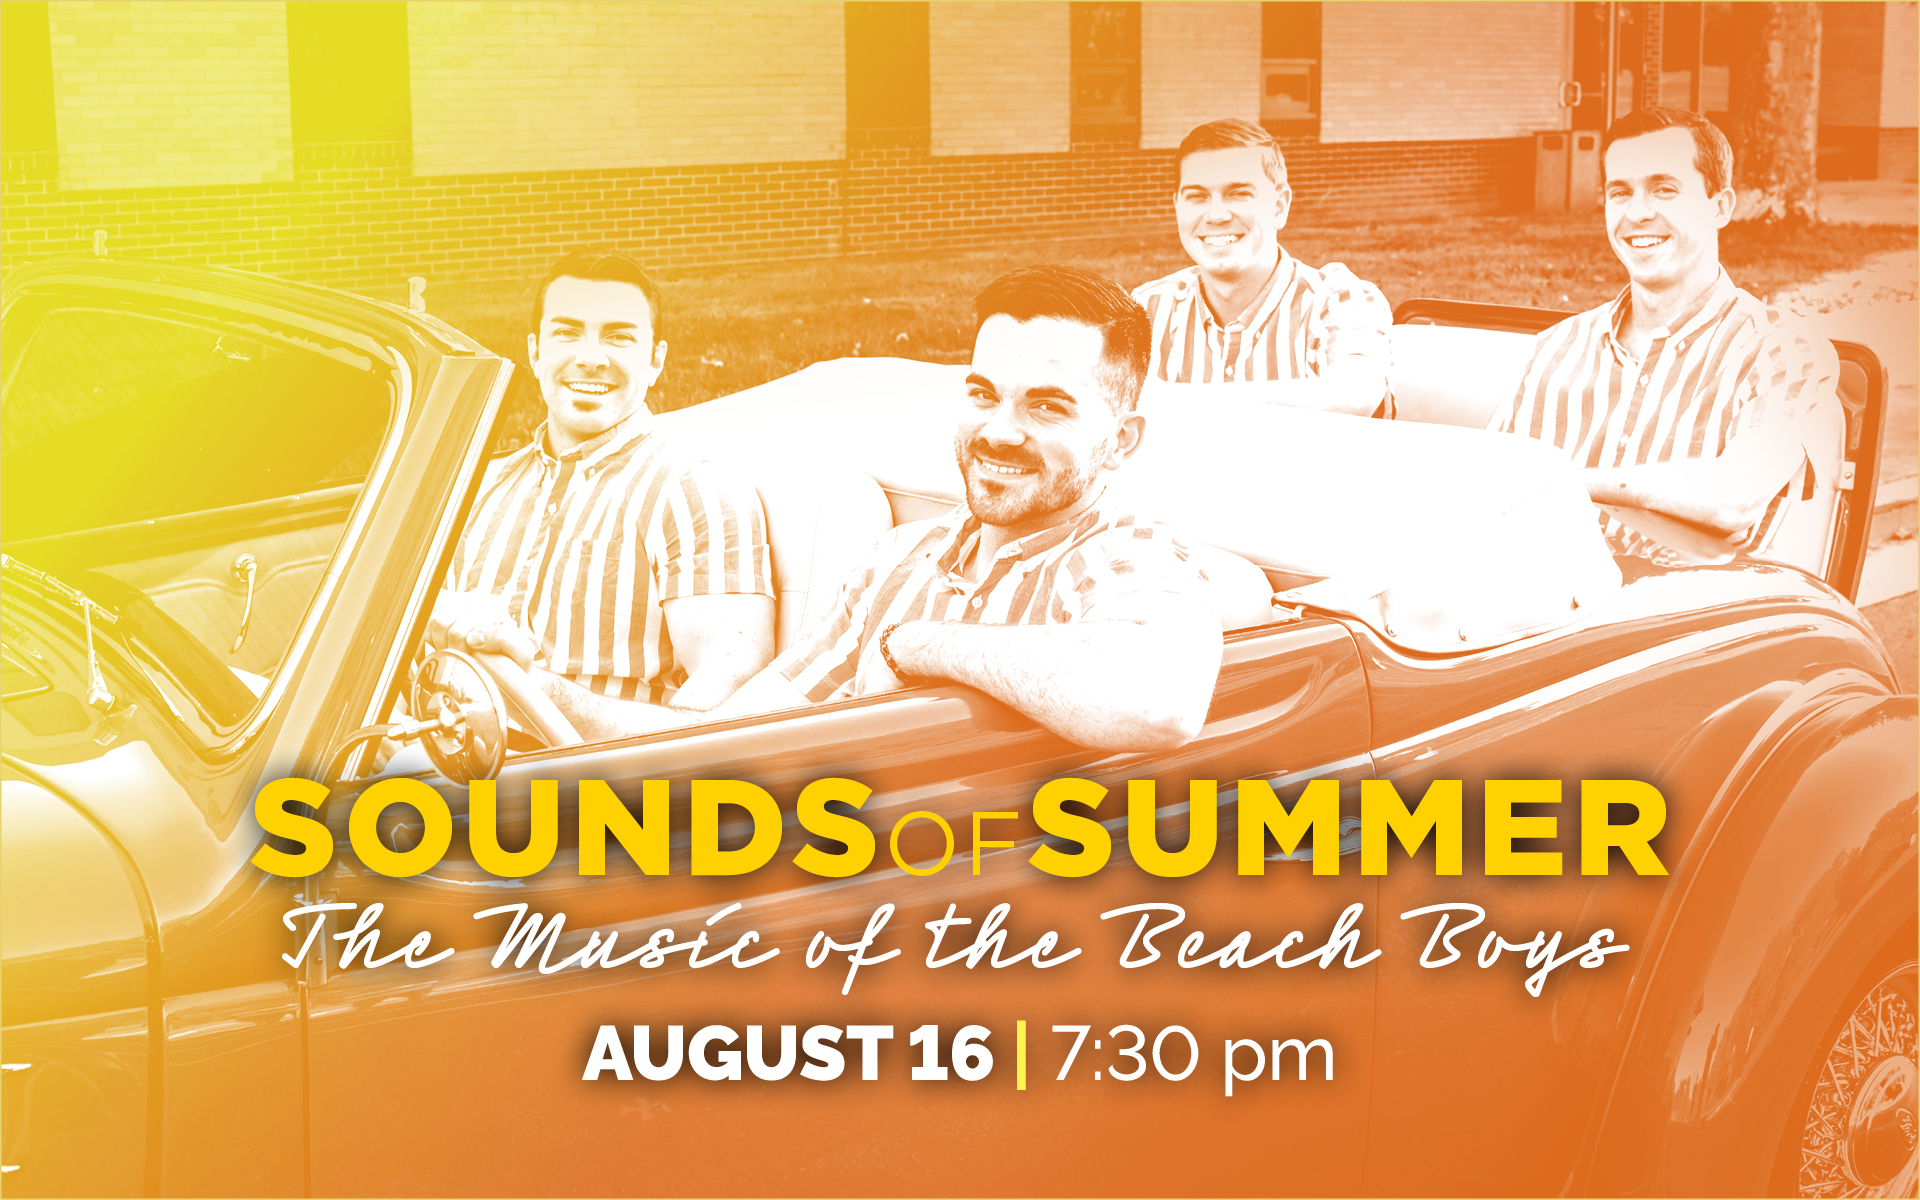 August 16 – Sounds of Summer: The Music of the Beach Boys